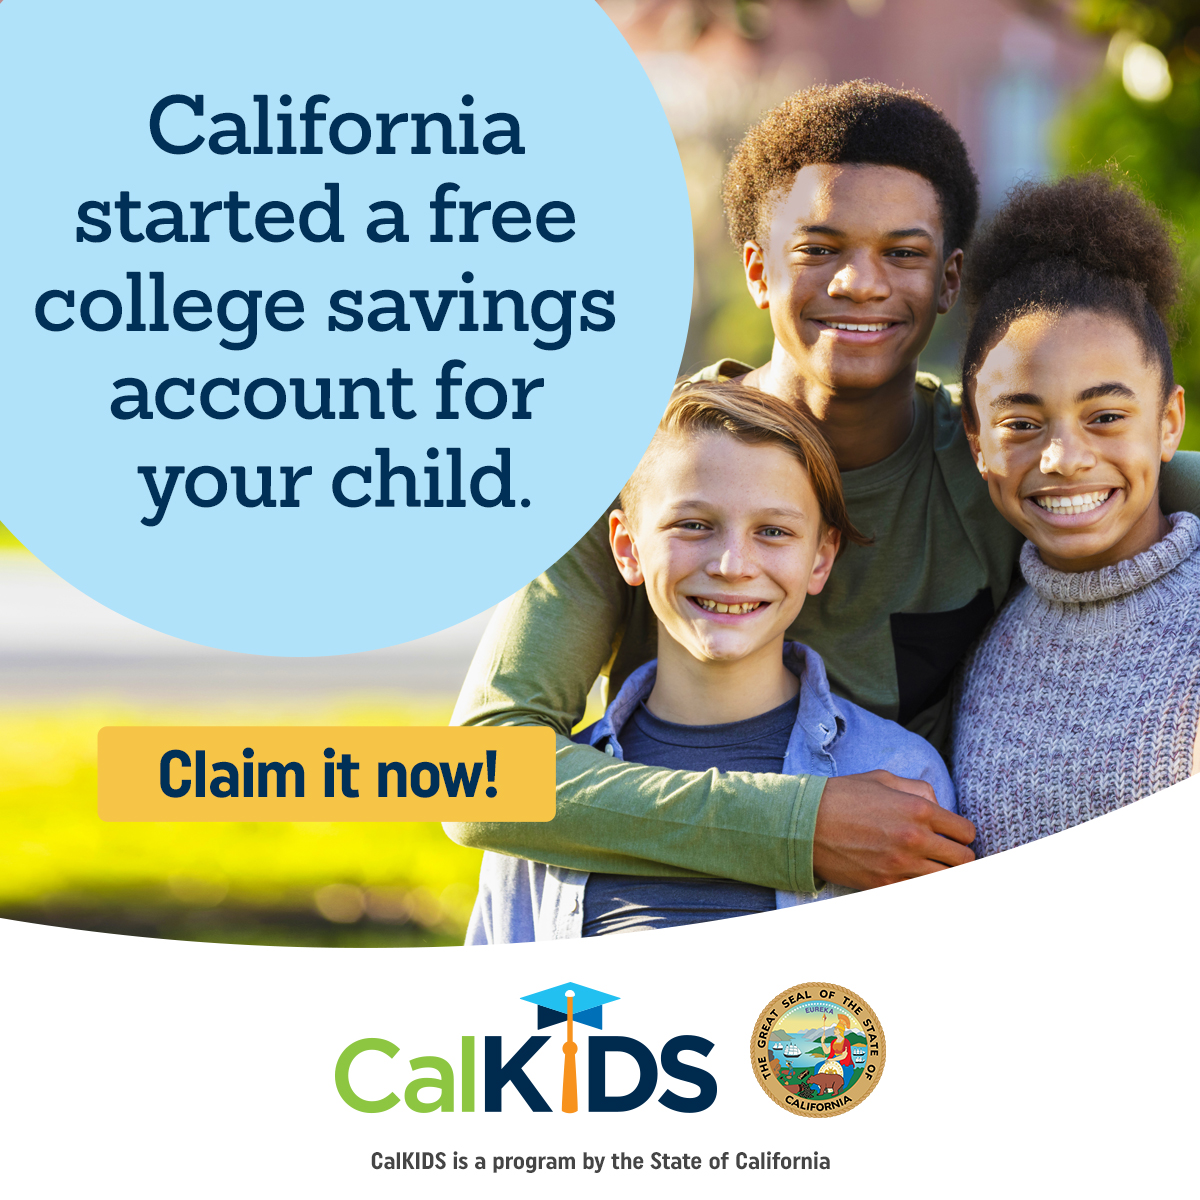 CalKIDS is a program from the State of California that funds up to $1,500 in free money for eligible low-income public school students to save for college and career training. Visit CalKIDS.org to claim your account.